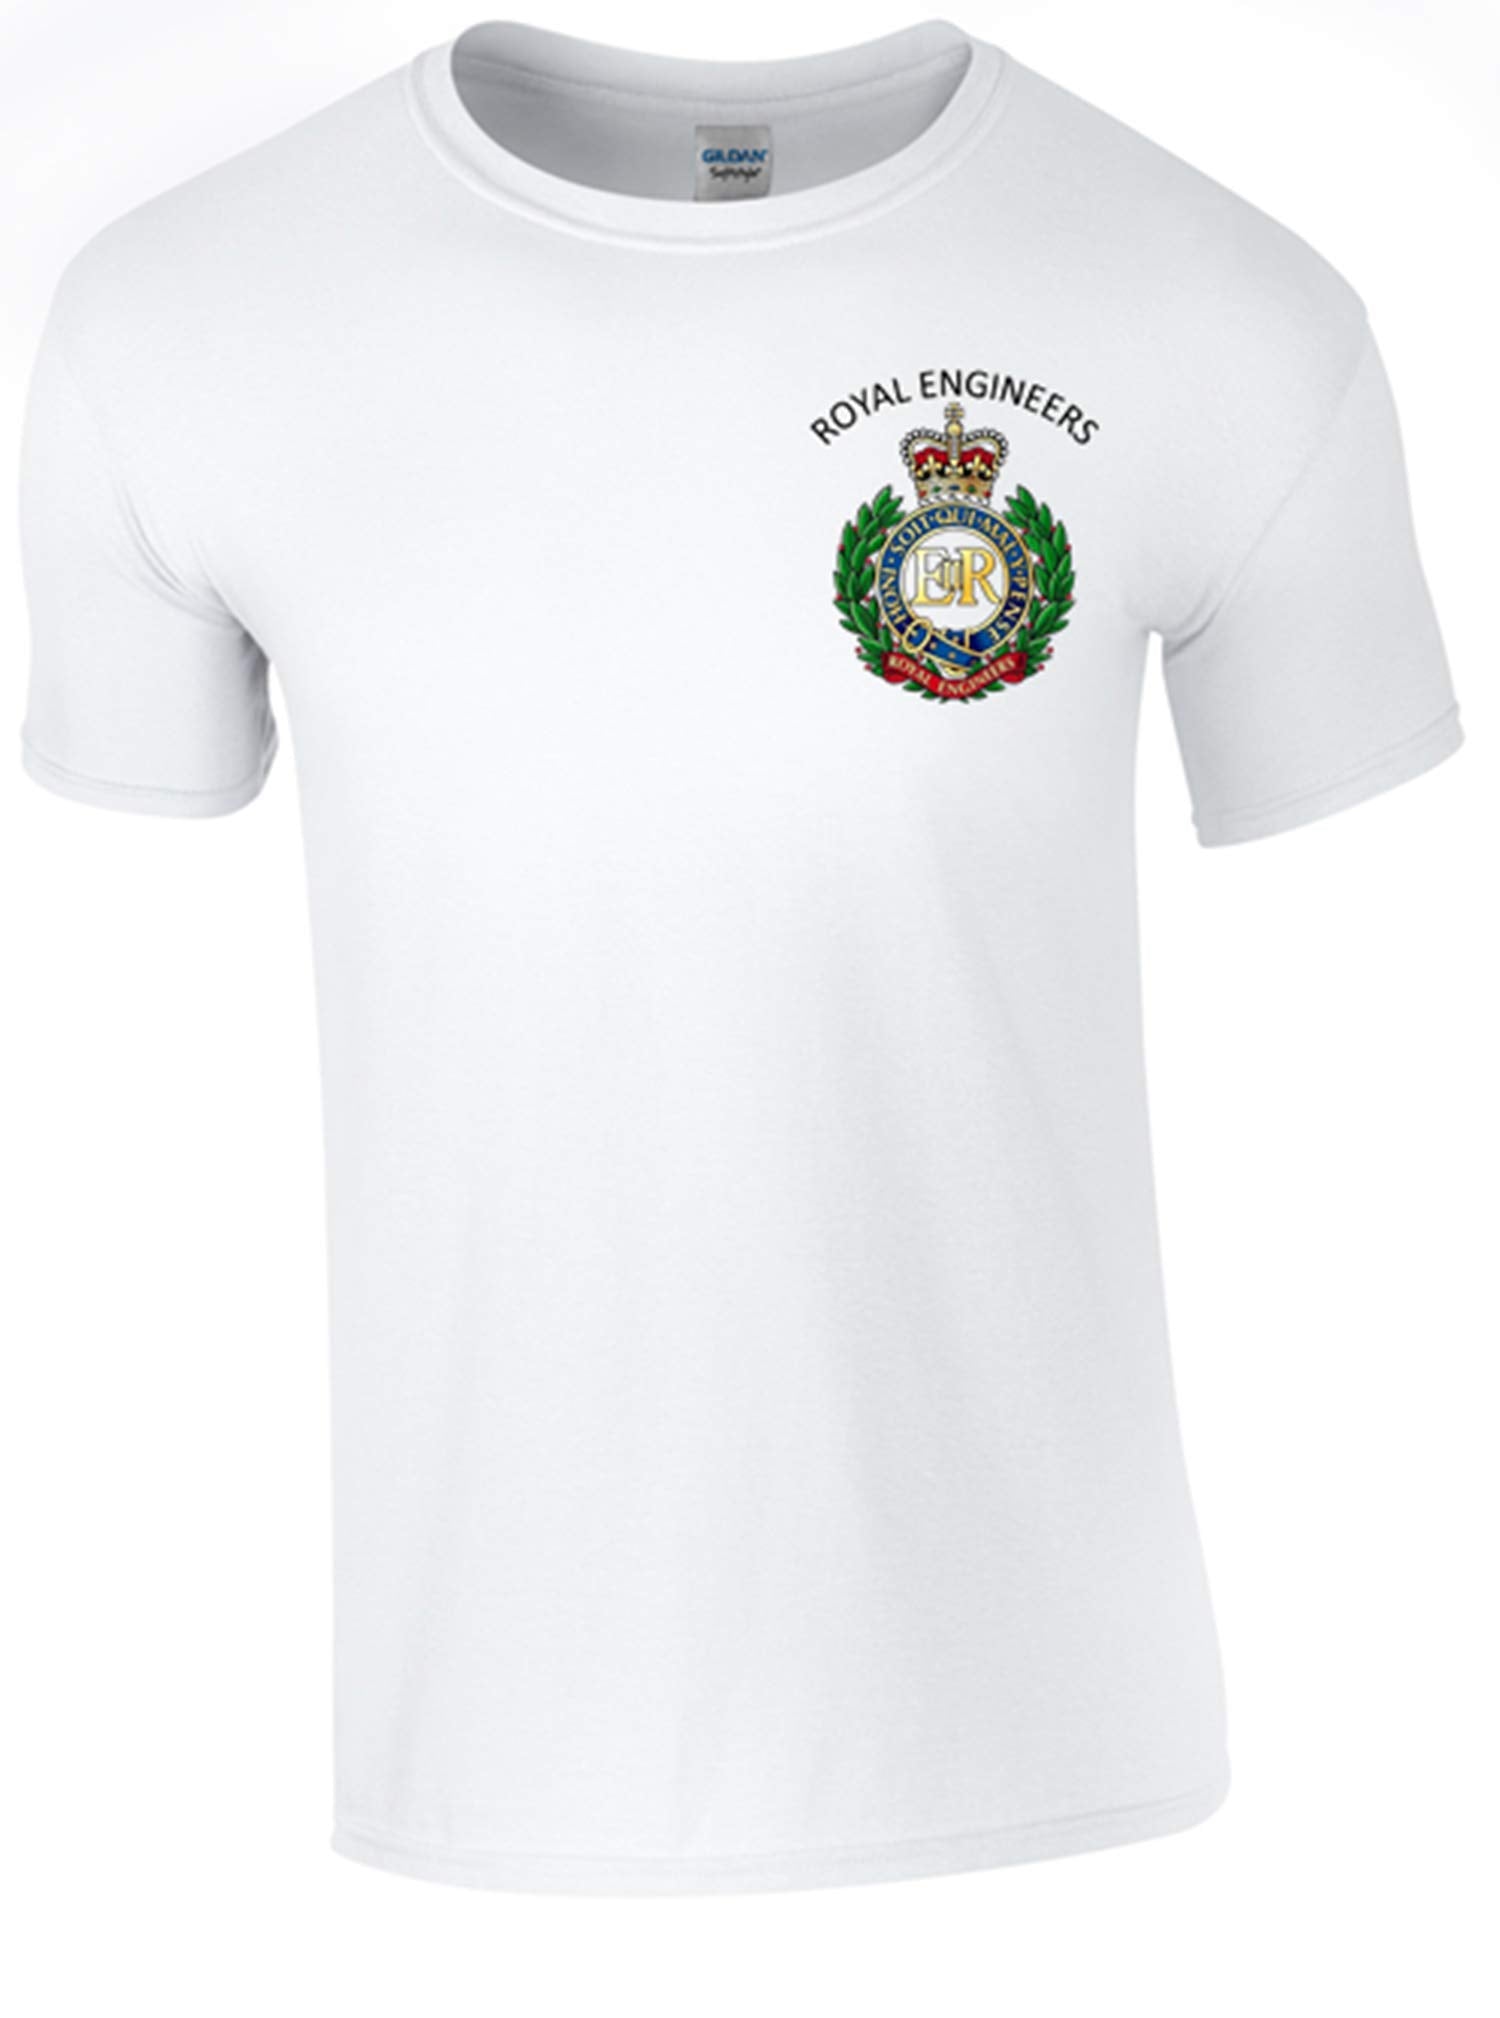 Royal Engineers T-Shirt Front Logo only Official MOD Approved Merchandise - Army 1157 kit White / XXL Army 1157 Kit